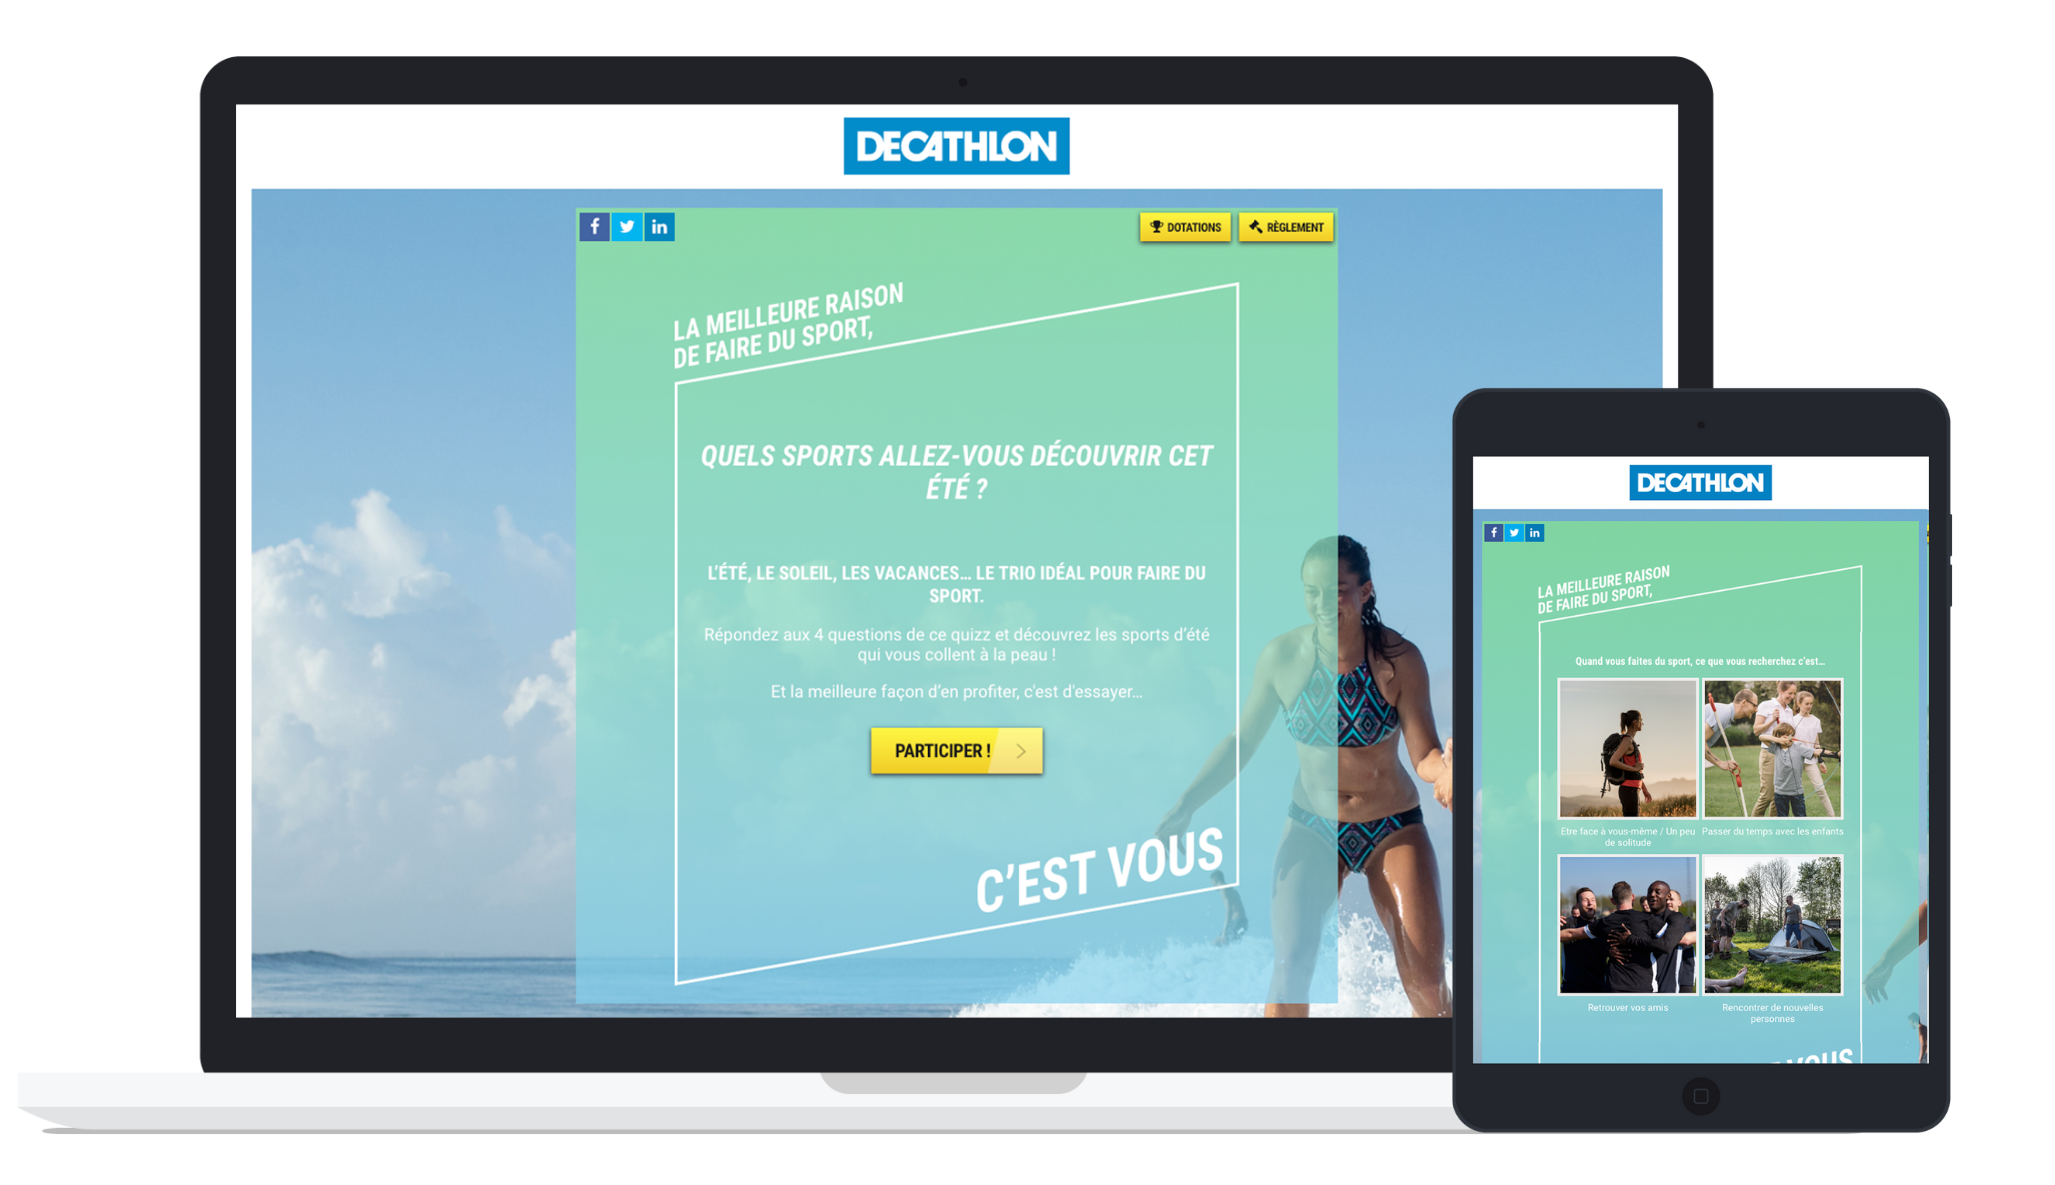 40-idees-campagnes-marketing-interactives-grandes-marques-europennes-decathlon